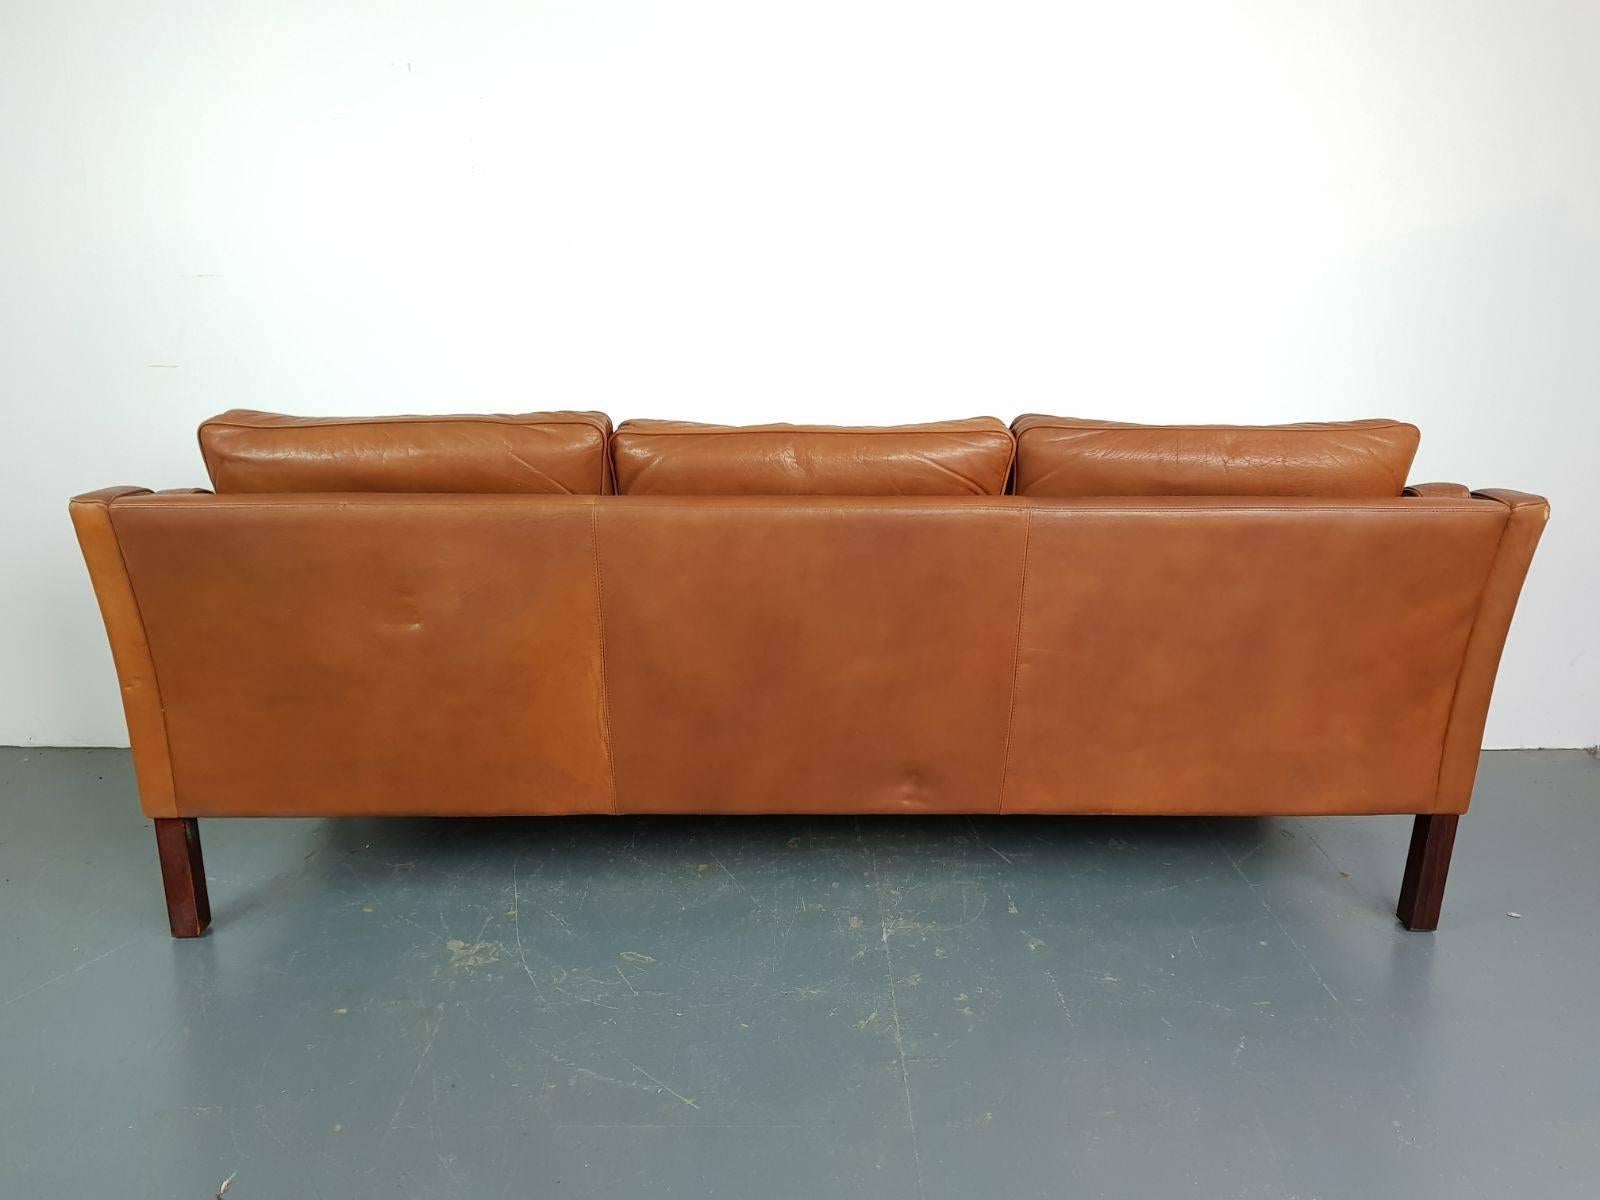 Vintage Midcentury Danish Mogensen Style Three-Seat Sofa  In Good Condition For Sale In Lewes, East Sussex